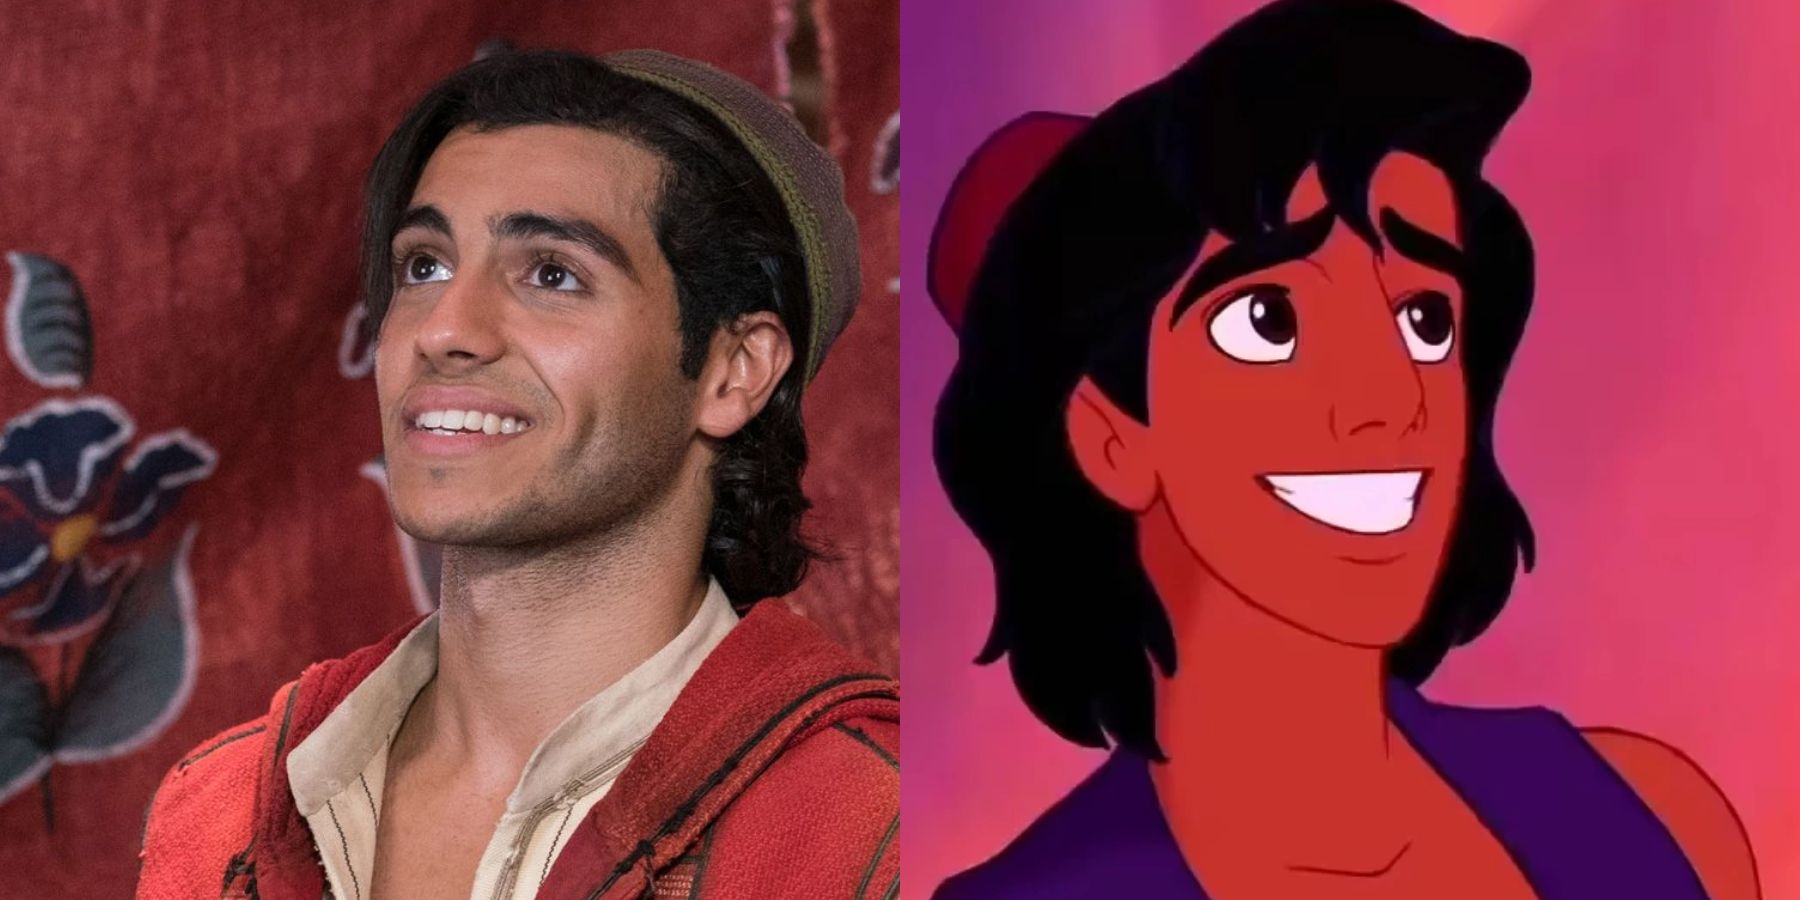 The controversy over Disney's new Aladdin remake, explained - Vox